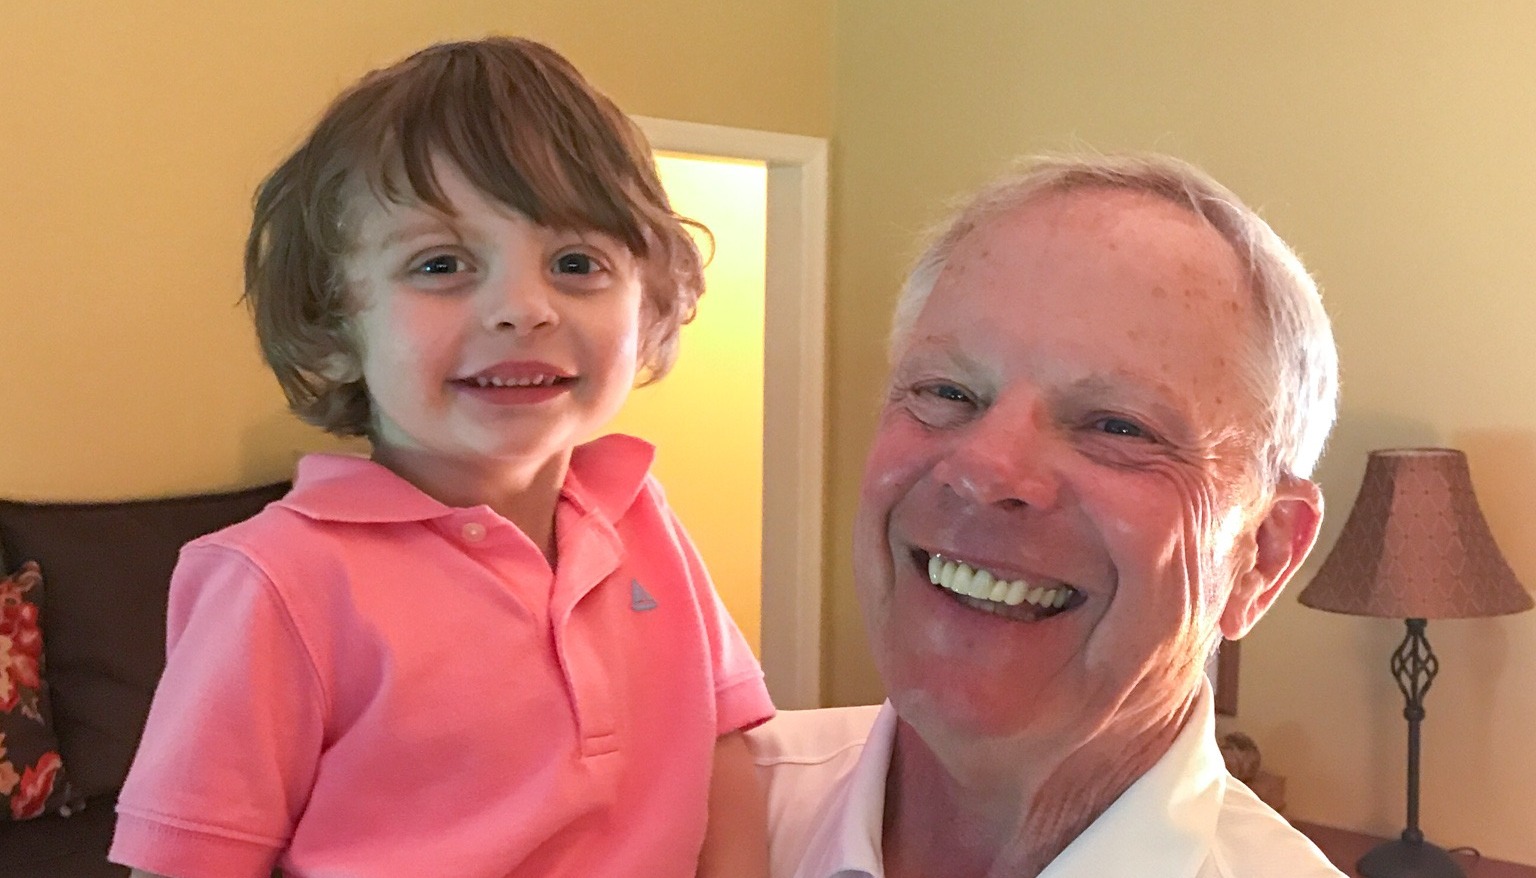 Doc Sander and now 7-year-old grandson Finnegan smiling together. 